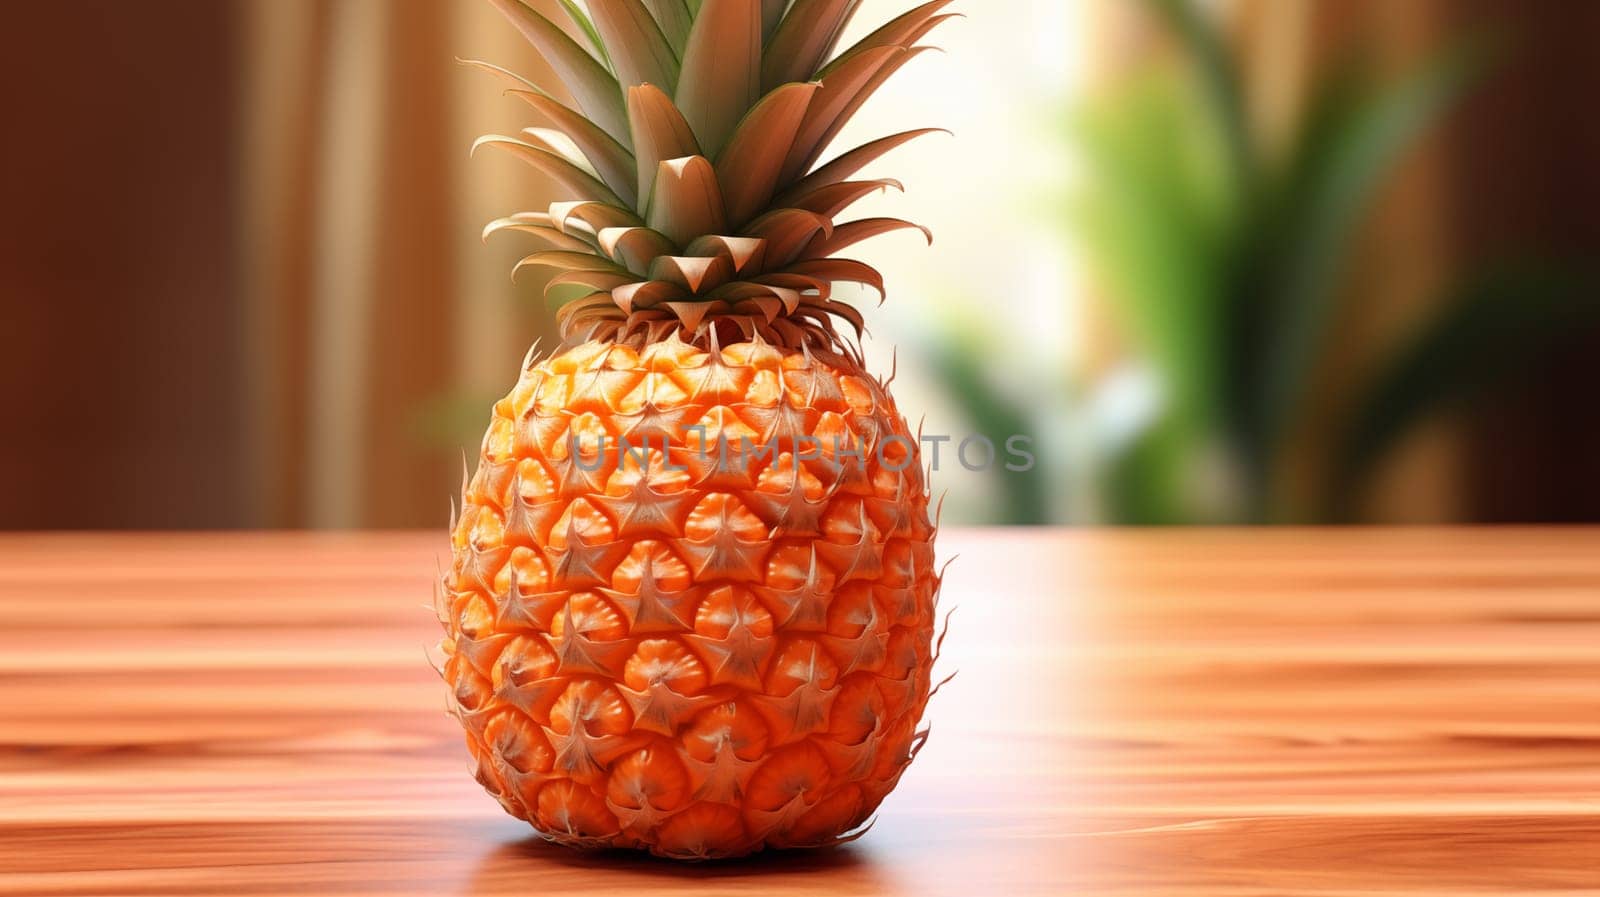 A pineapple stands on a wooden table in the room, a blurred background with a plant by the window.